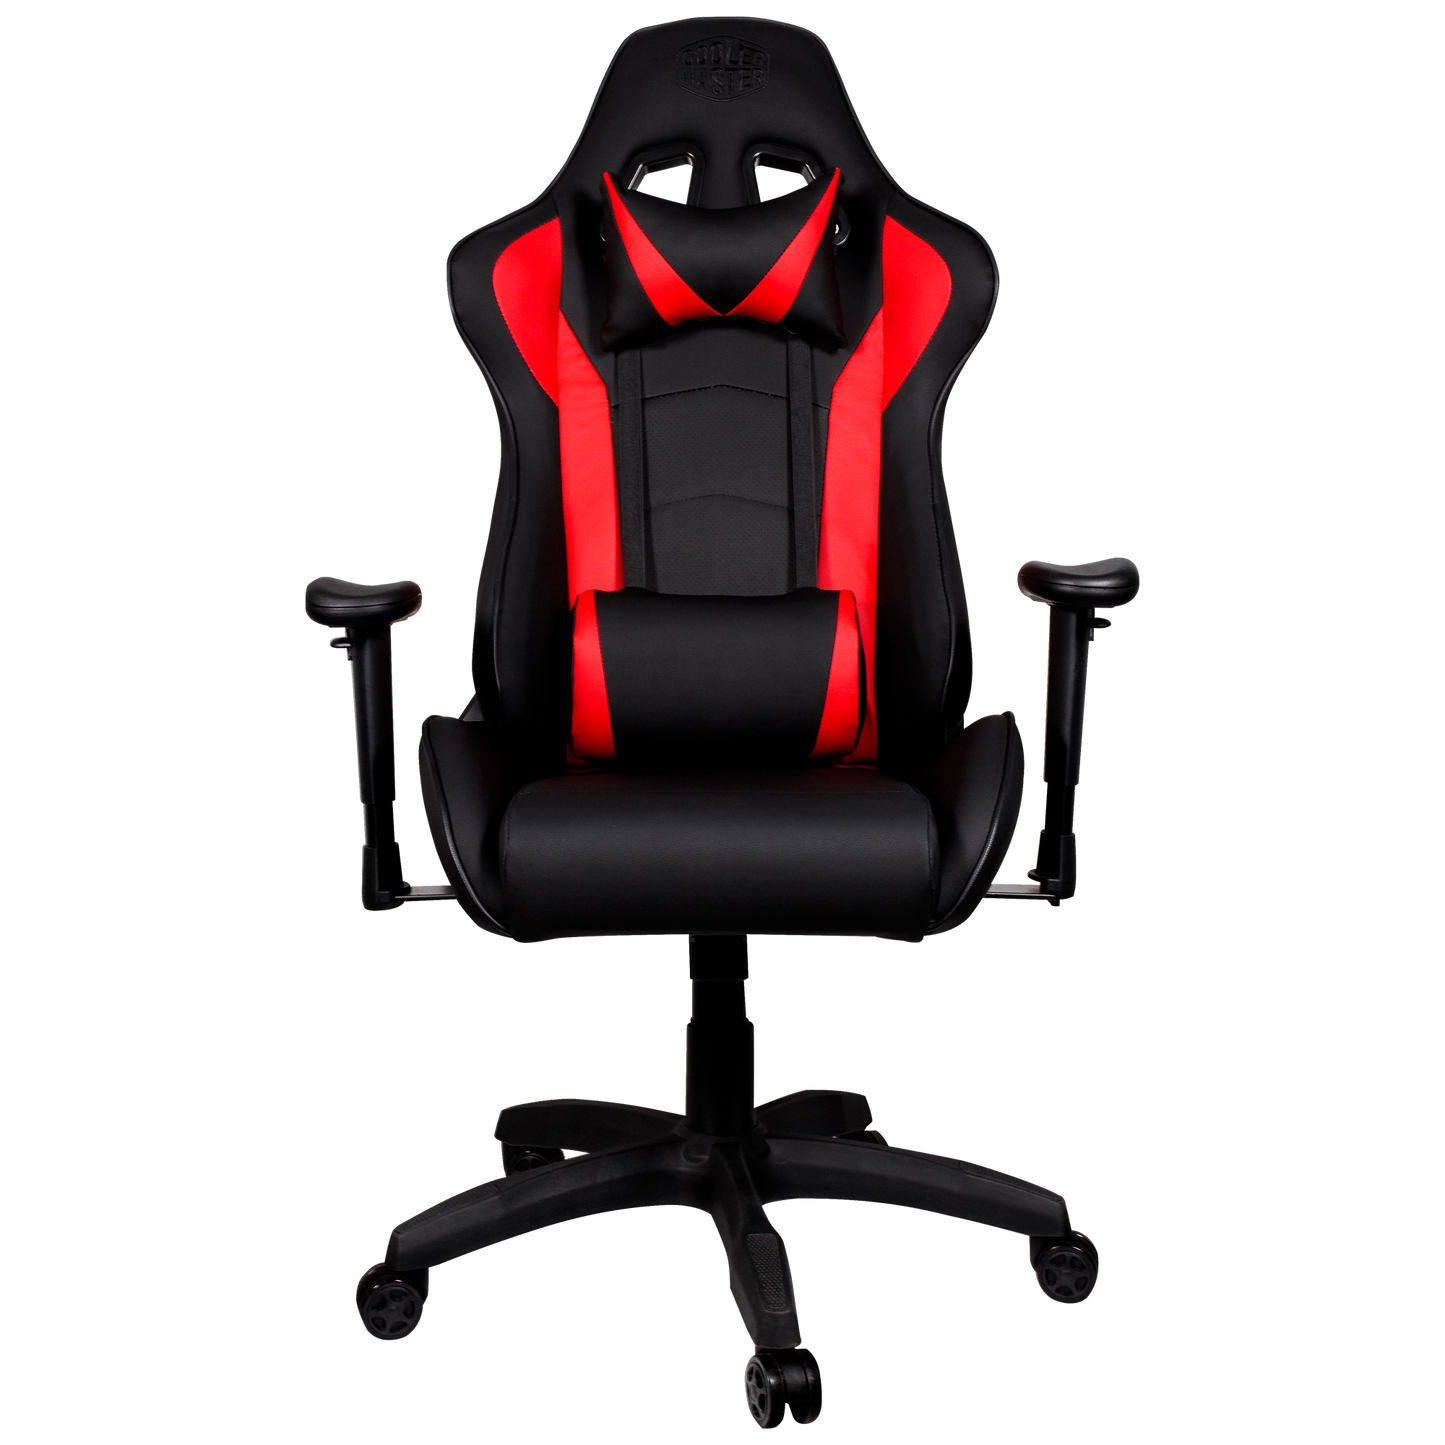 Cooler Master Caliber R1 Gaming Chair - Black/Red